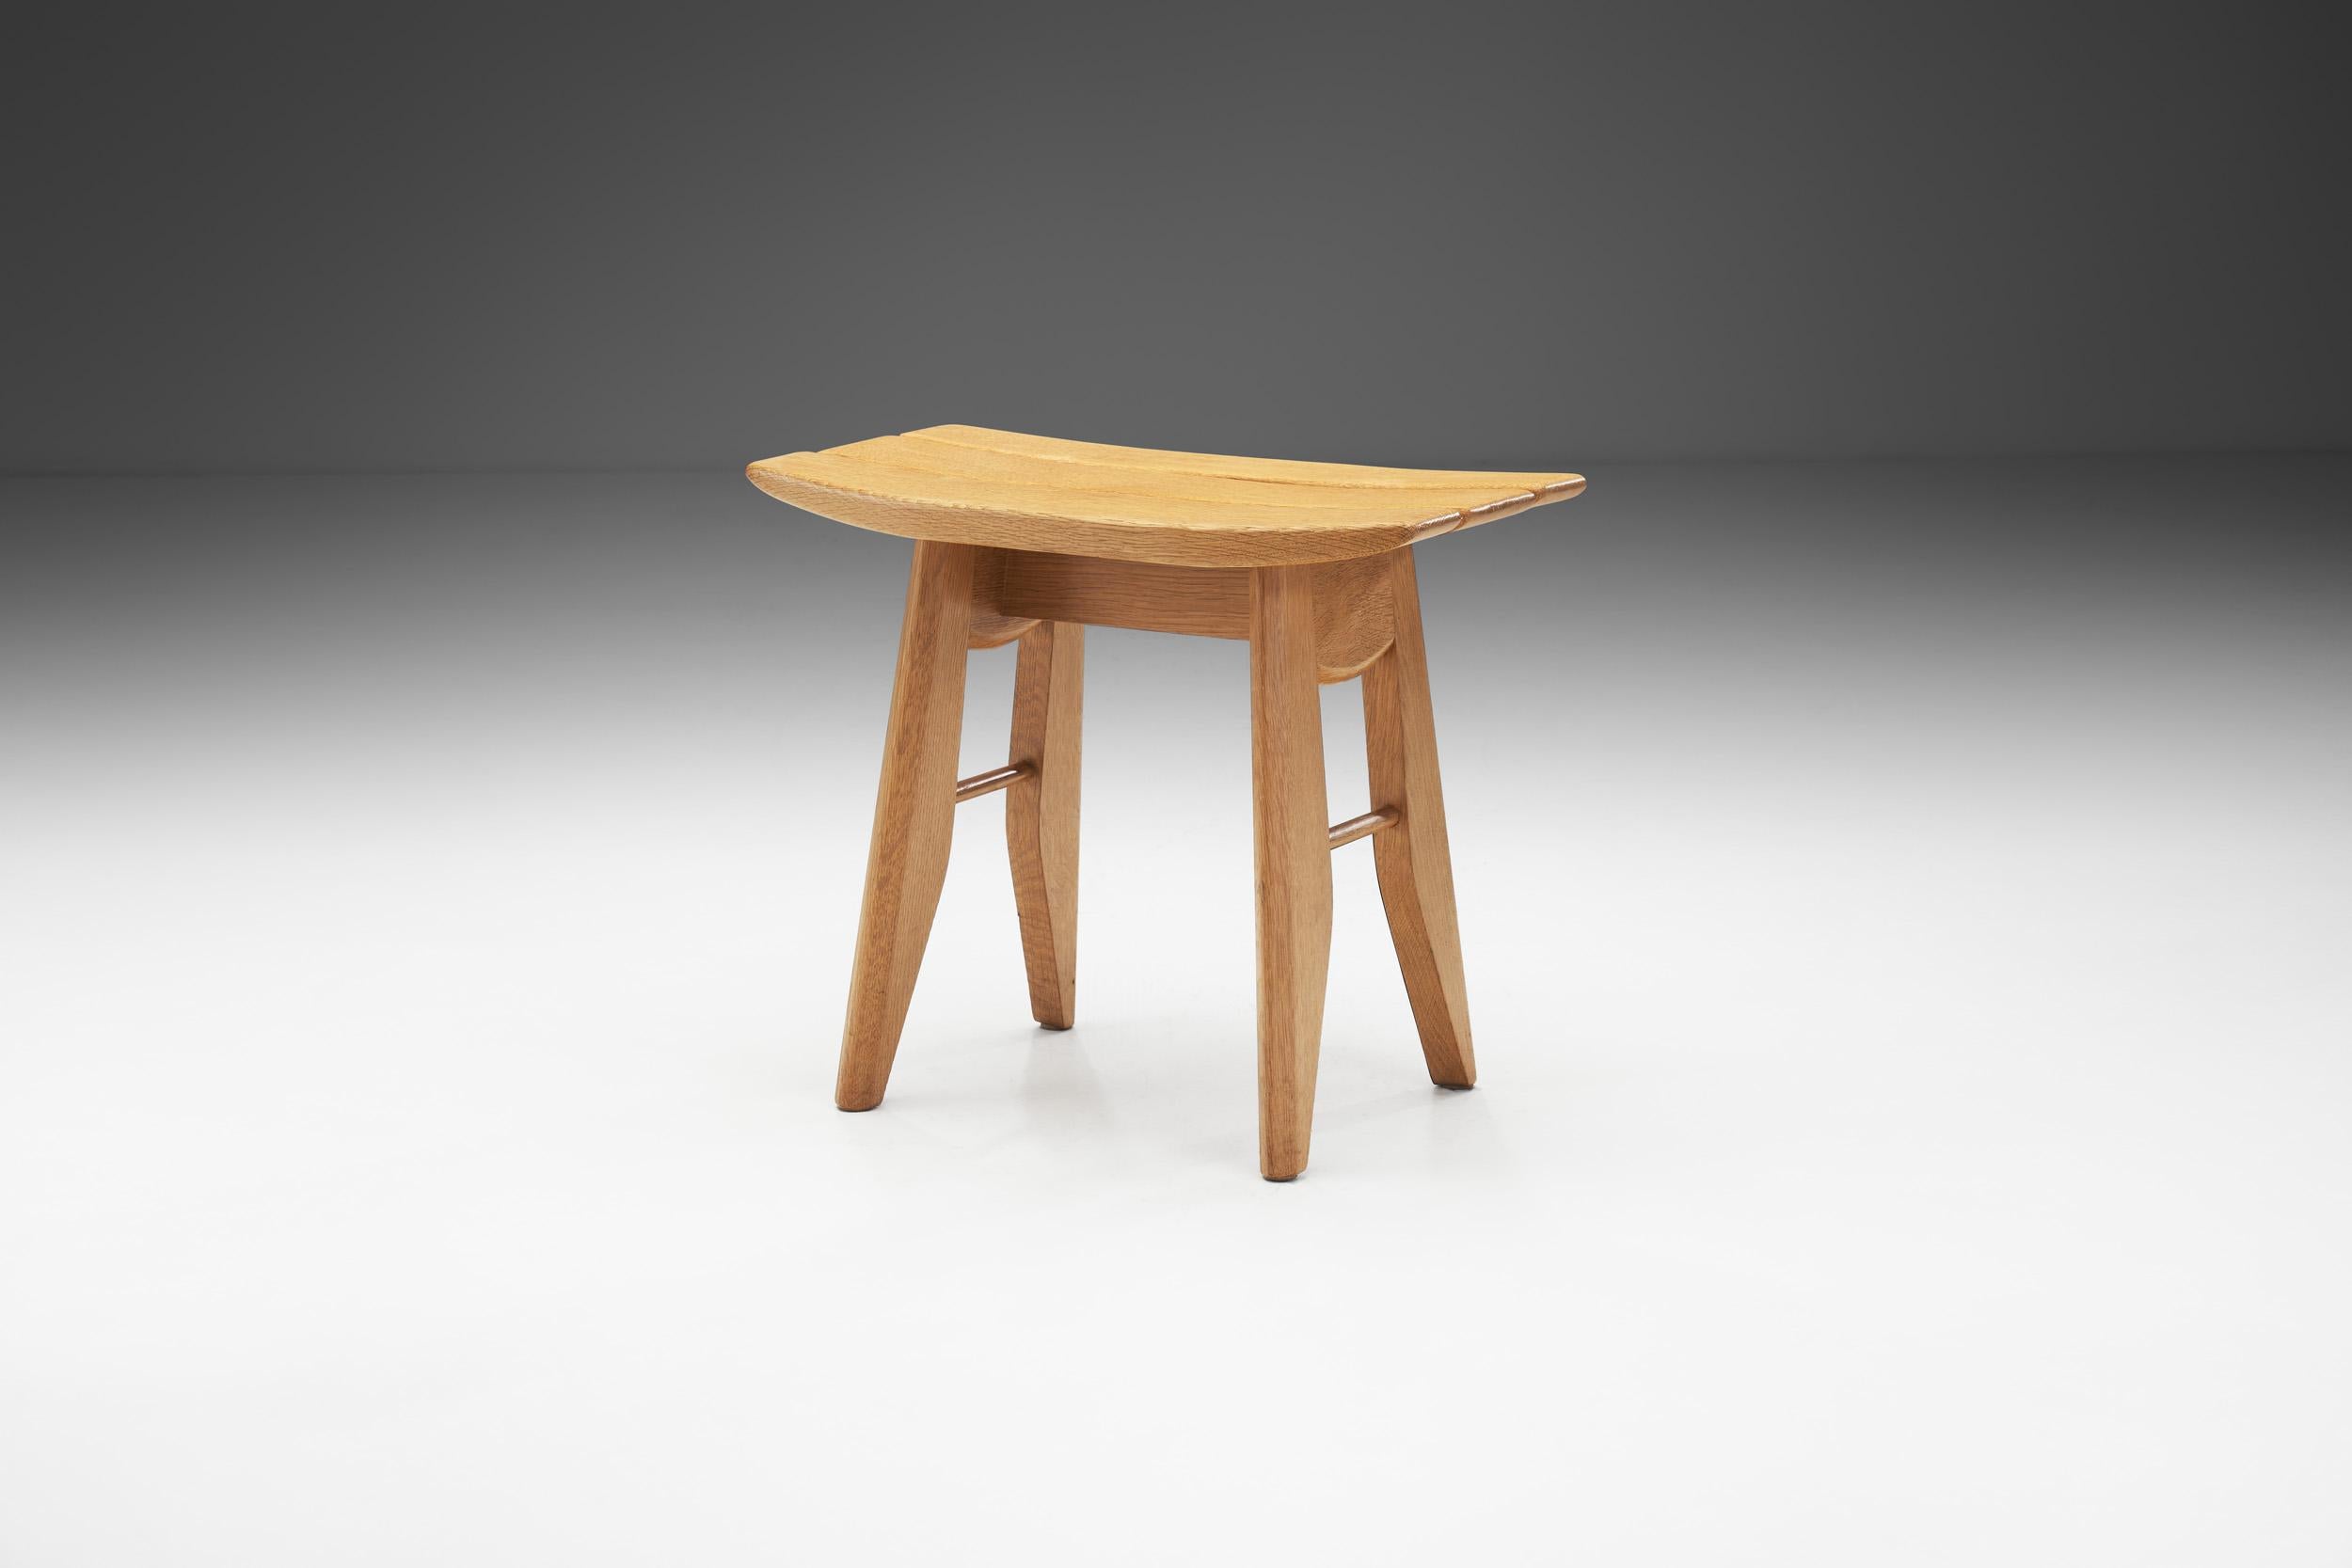 Form and function collide in this stool, a piece of furniture that is often underestimated. Designers define stools as jewels and statements in a space, and taking practicality into account, this rare model is perfect to add visual interest to any